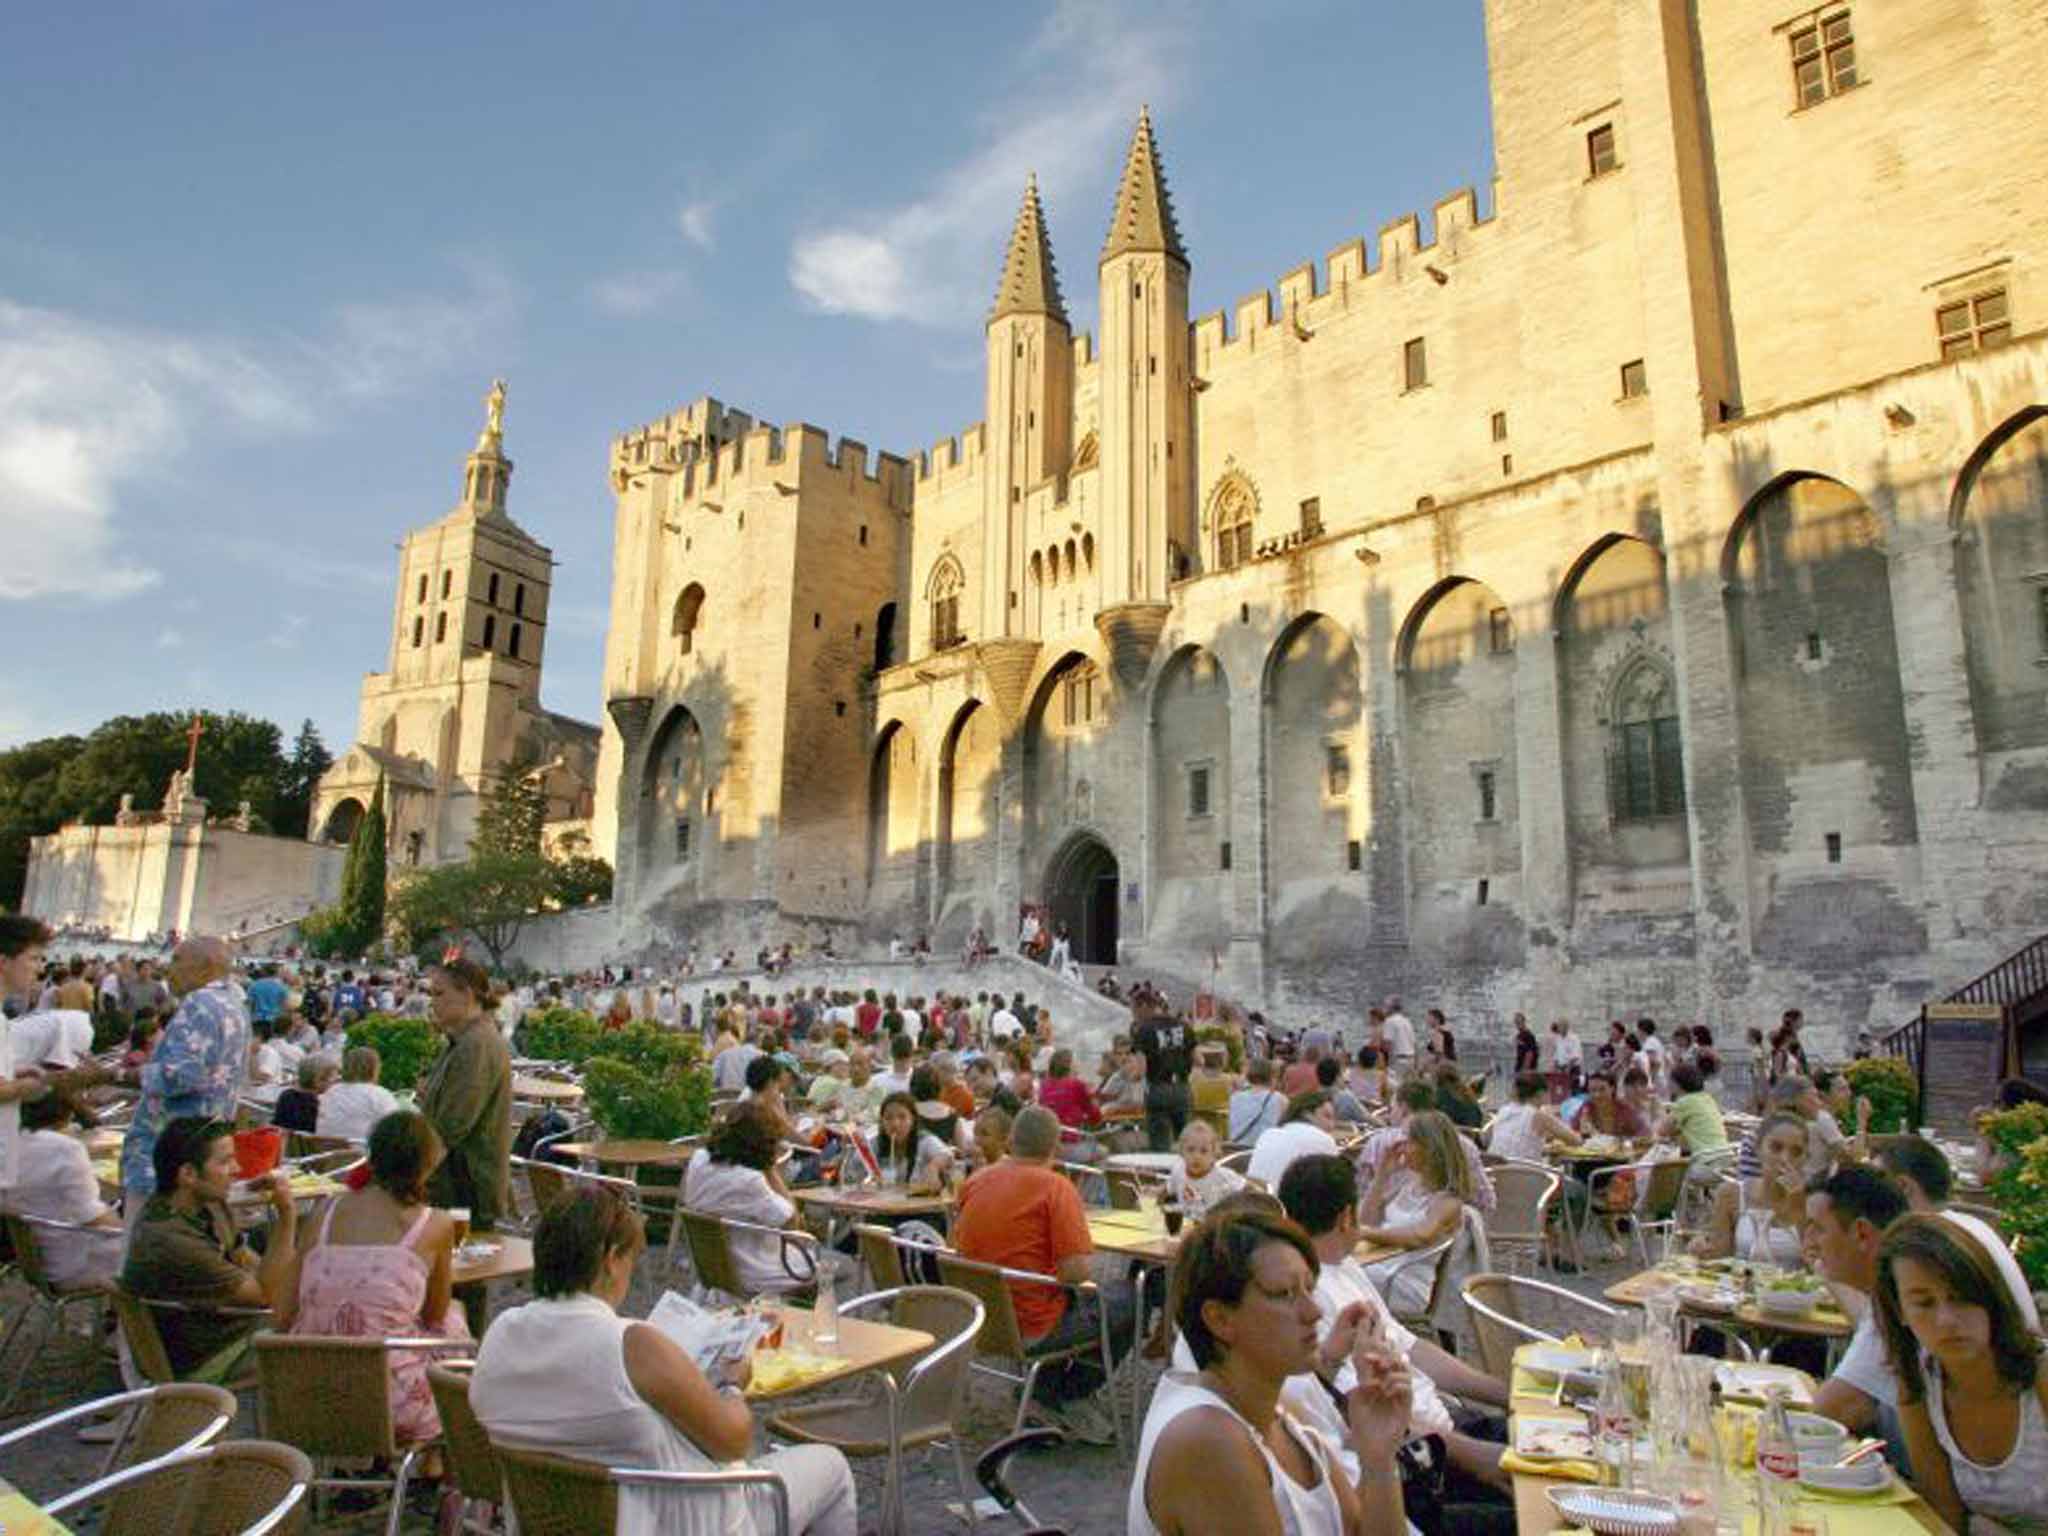 Avignon travel tips: Where to go and what to see in 48 hours | The ...